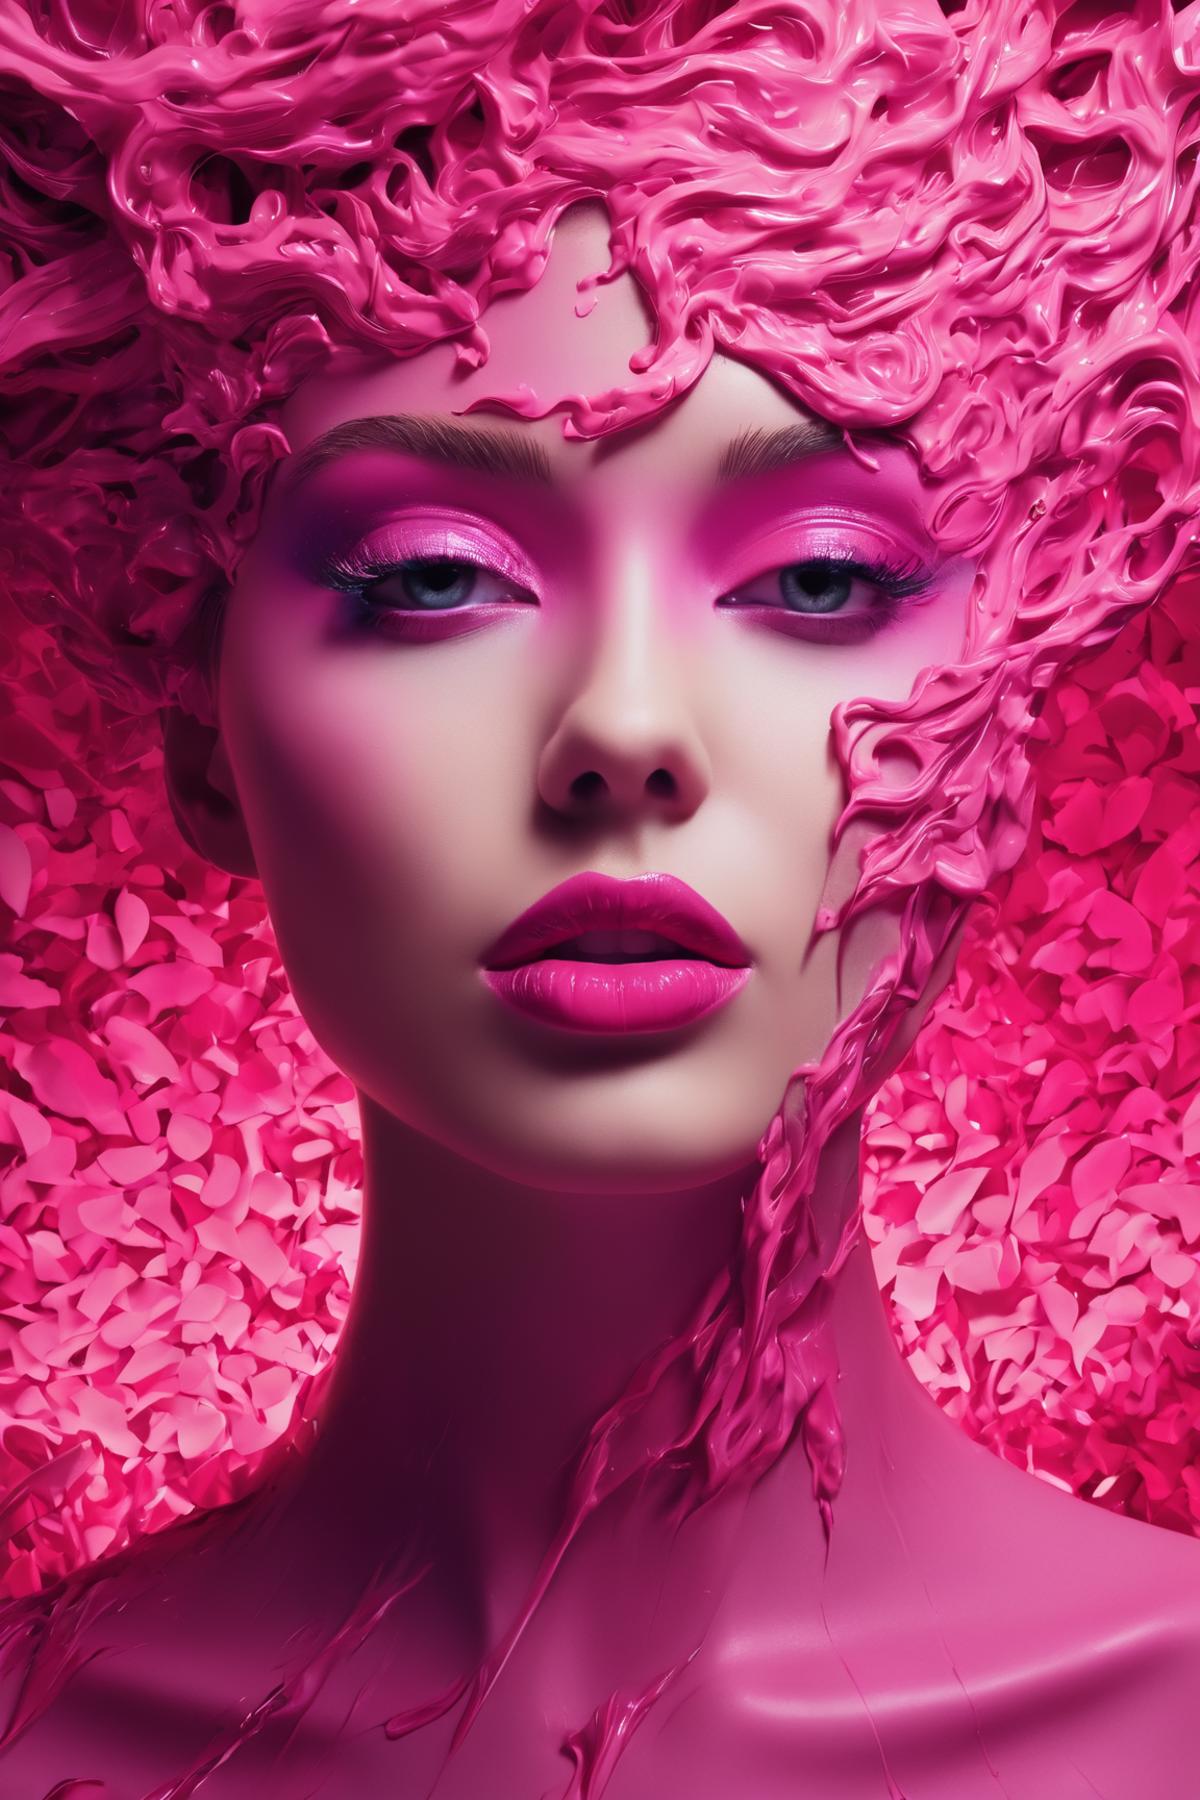 A woman with pink makeup on her face and a pink background.